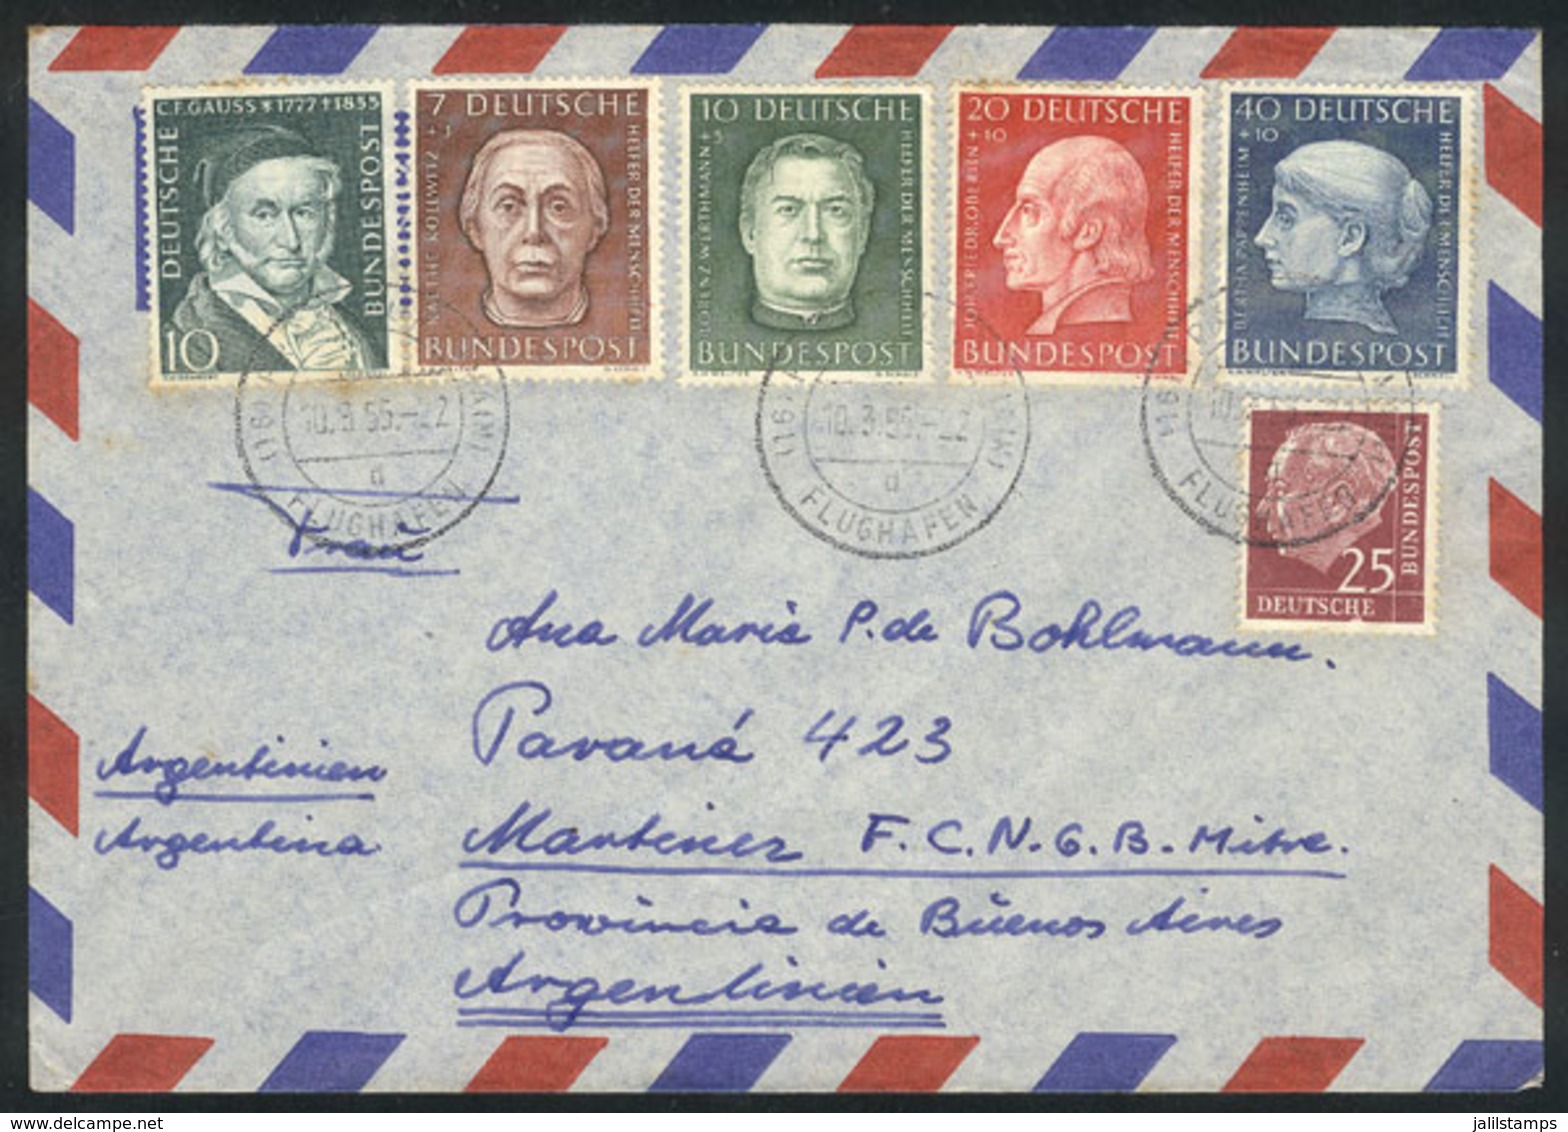 WEST GERMANY: Airmail Cover Sent To Argentina On 10/MAR/1955, Franked With The Set Yvert 76/79 + Other Values, Very Nice - Brieven En Documenten